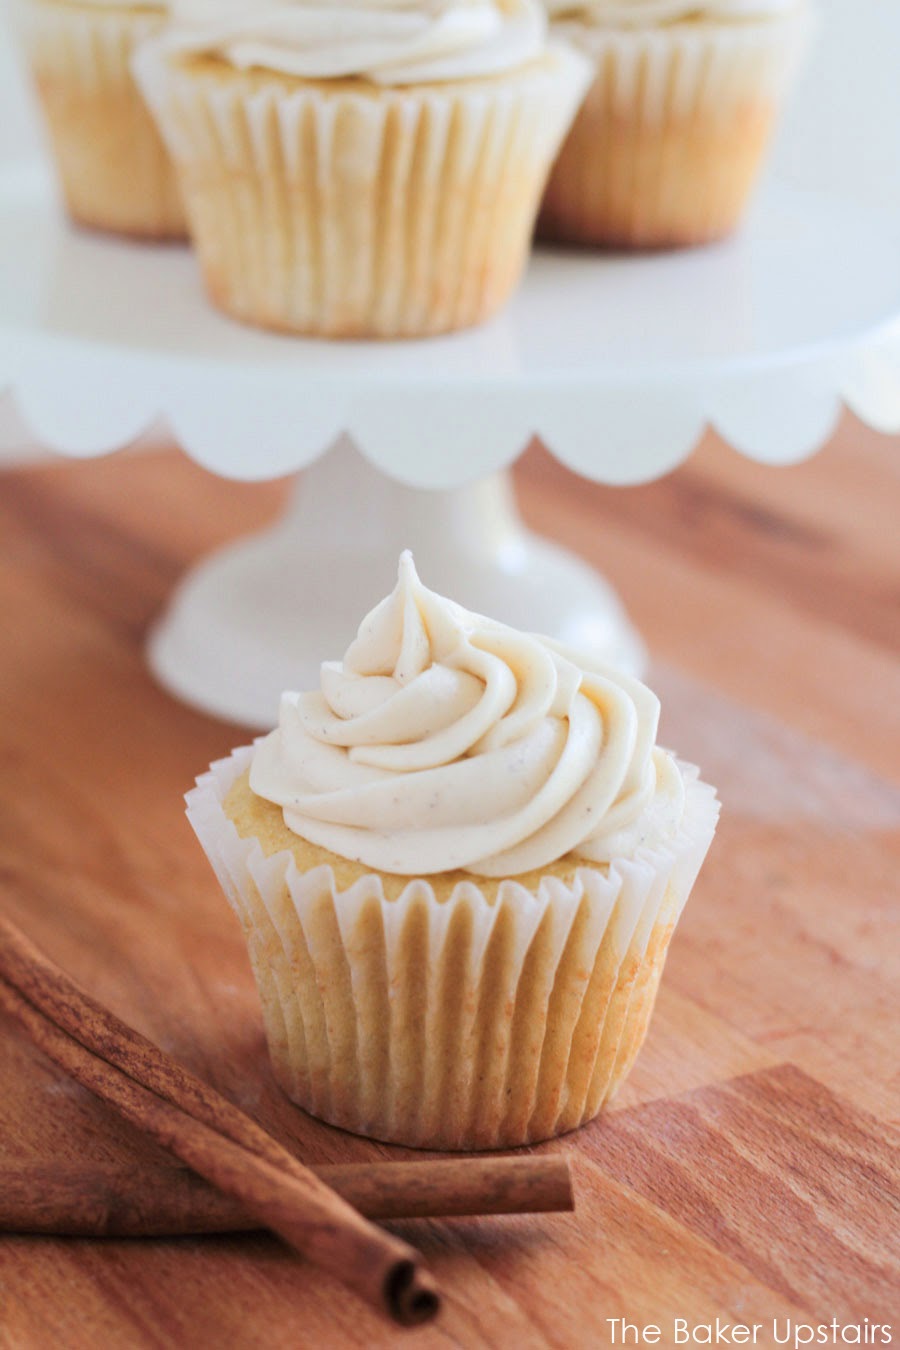 These deliciously sweet eggnog cupcakes are so light and fluffy, and are so easy to make! They have the perfect holiday flavor!